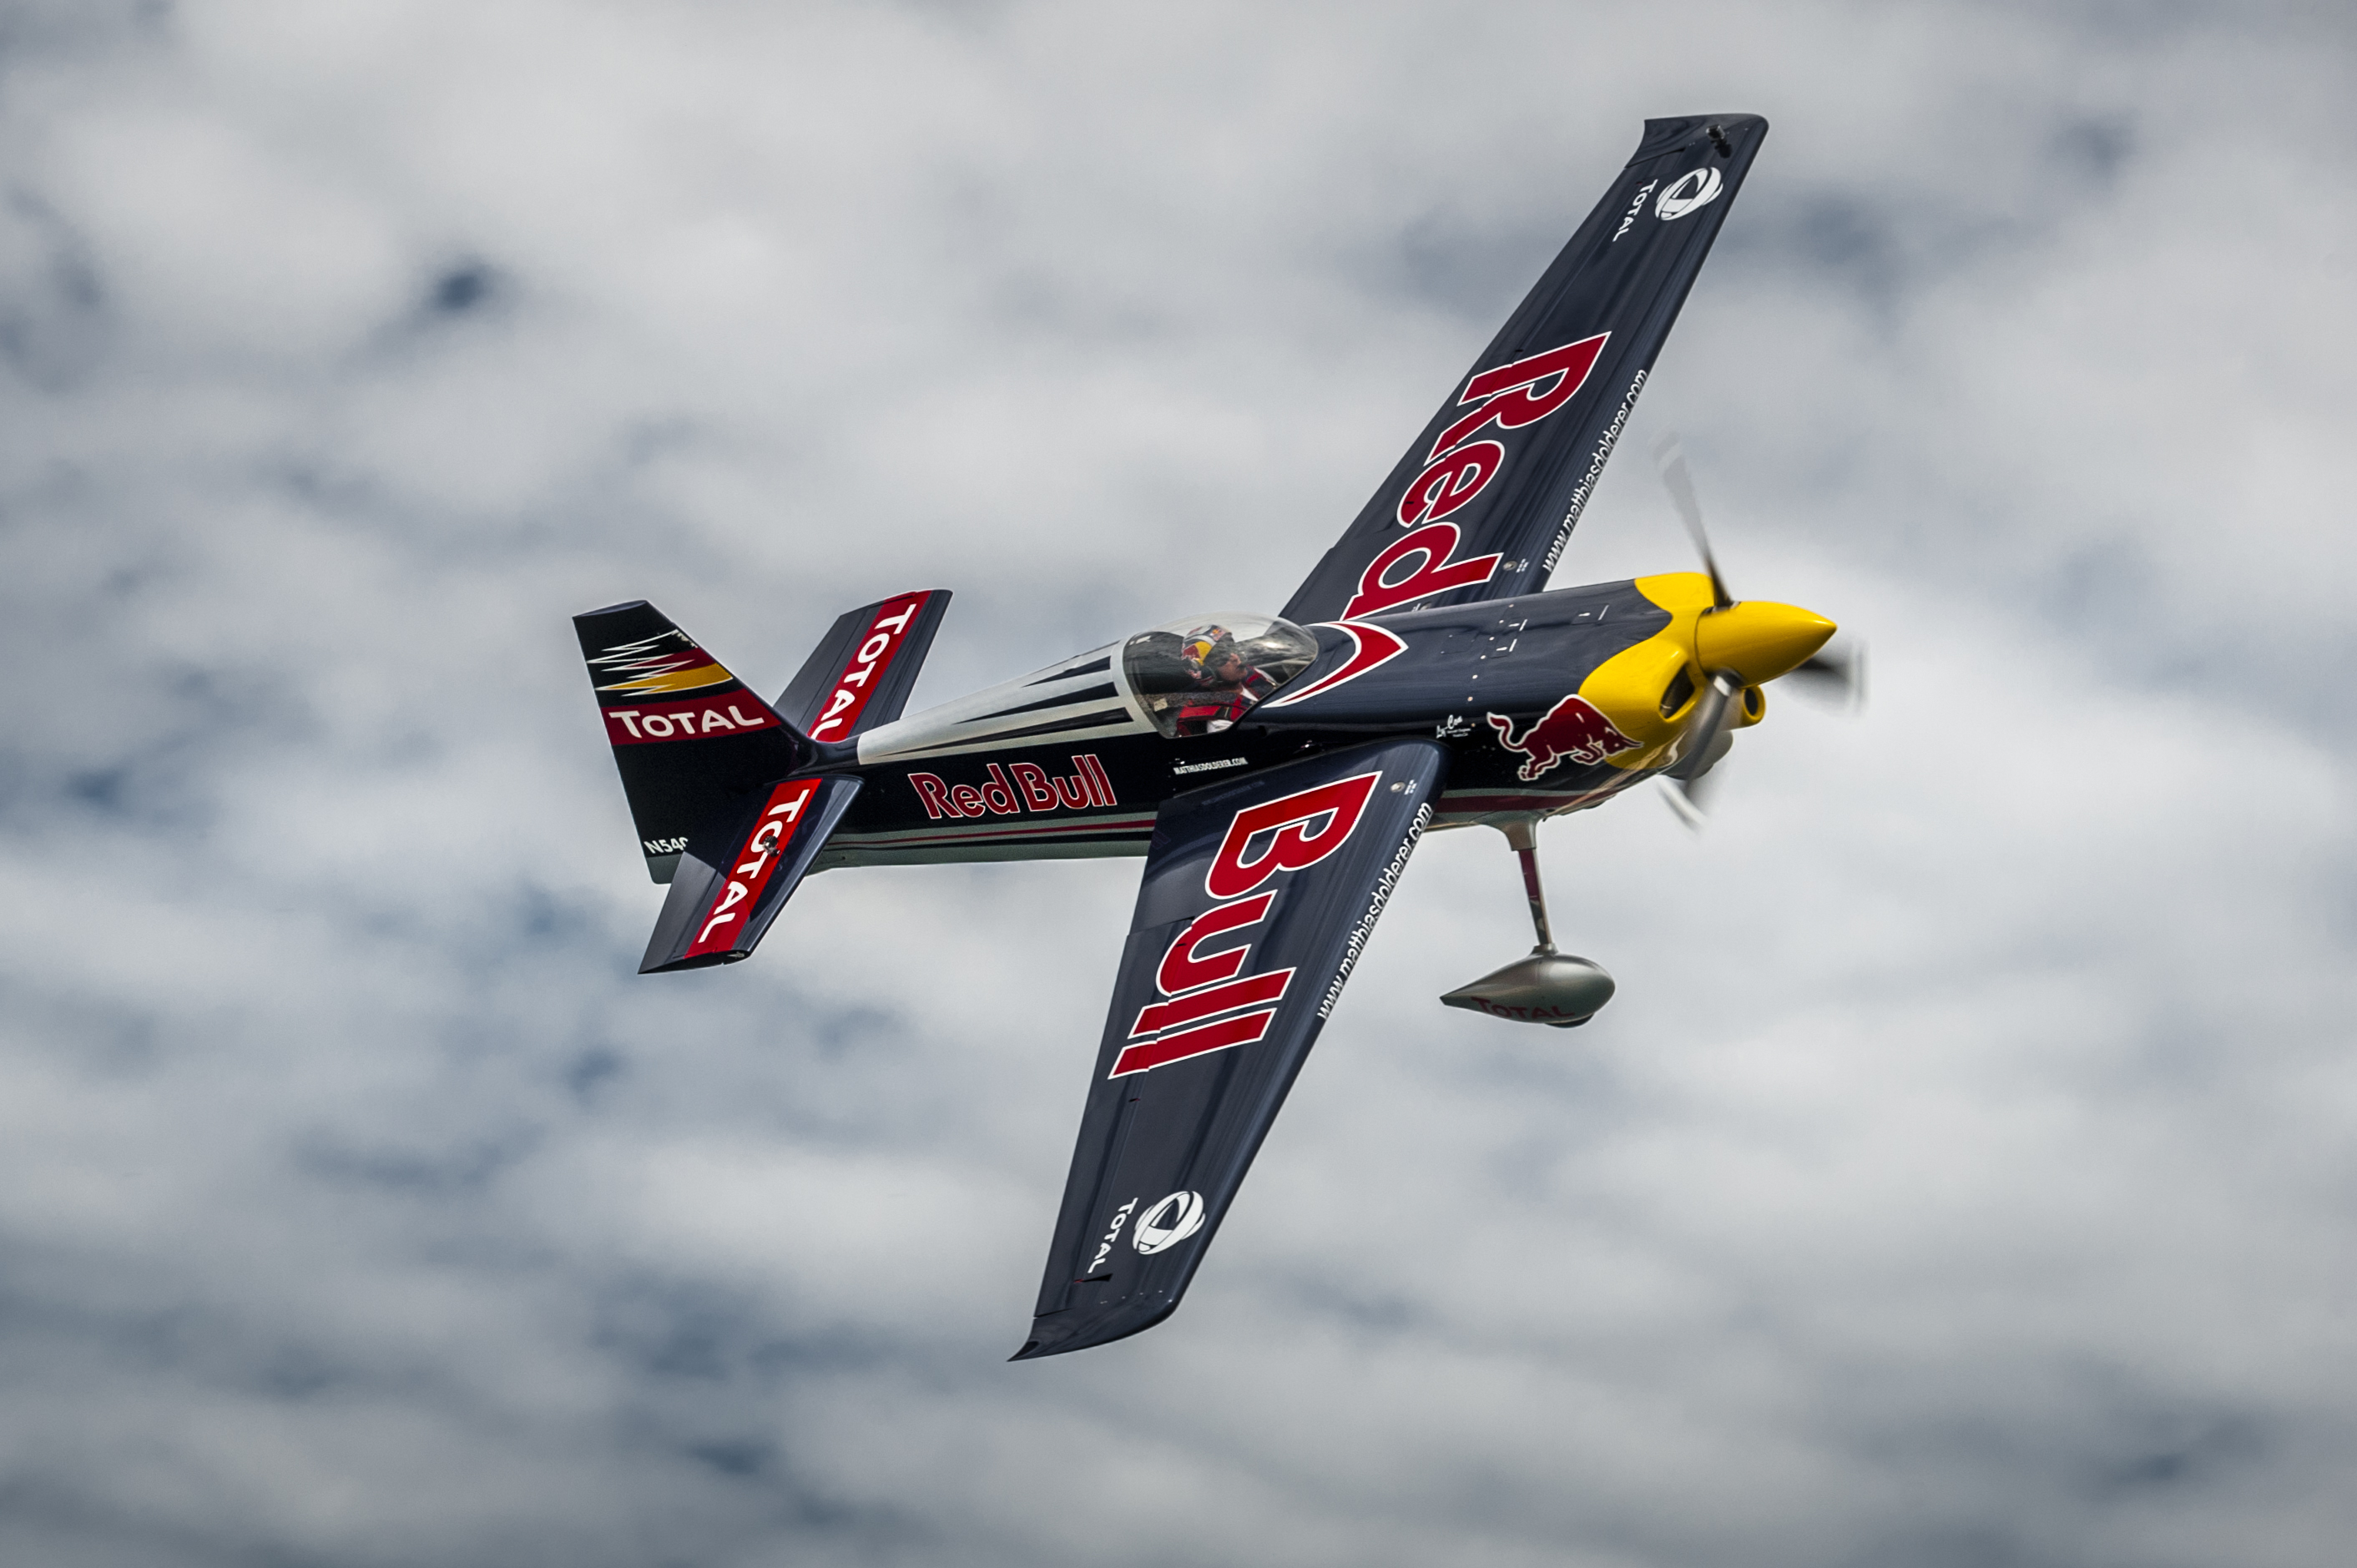 red bull air race, Airplane, Plane, Race, Racing, Red, Bull, Aircraft, Nv Wallpaper